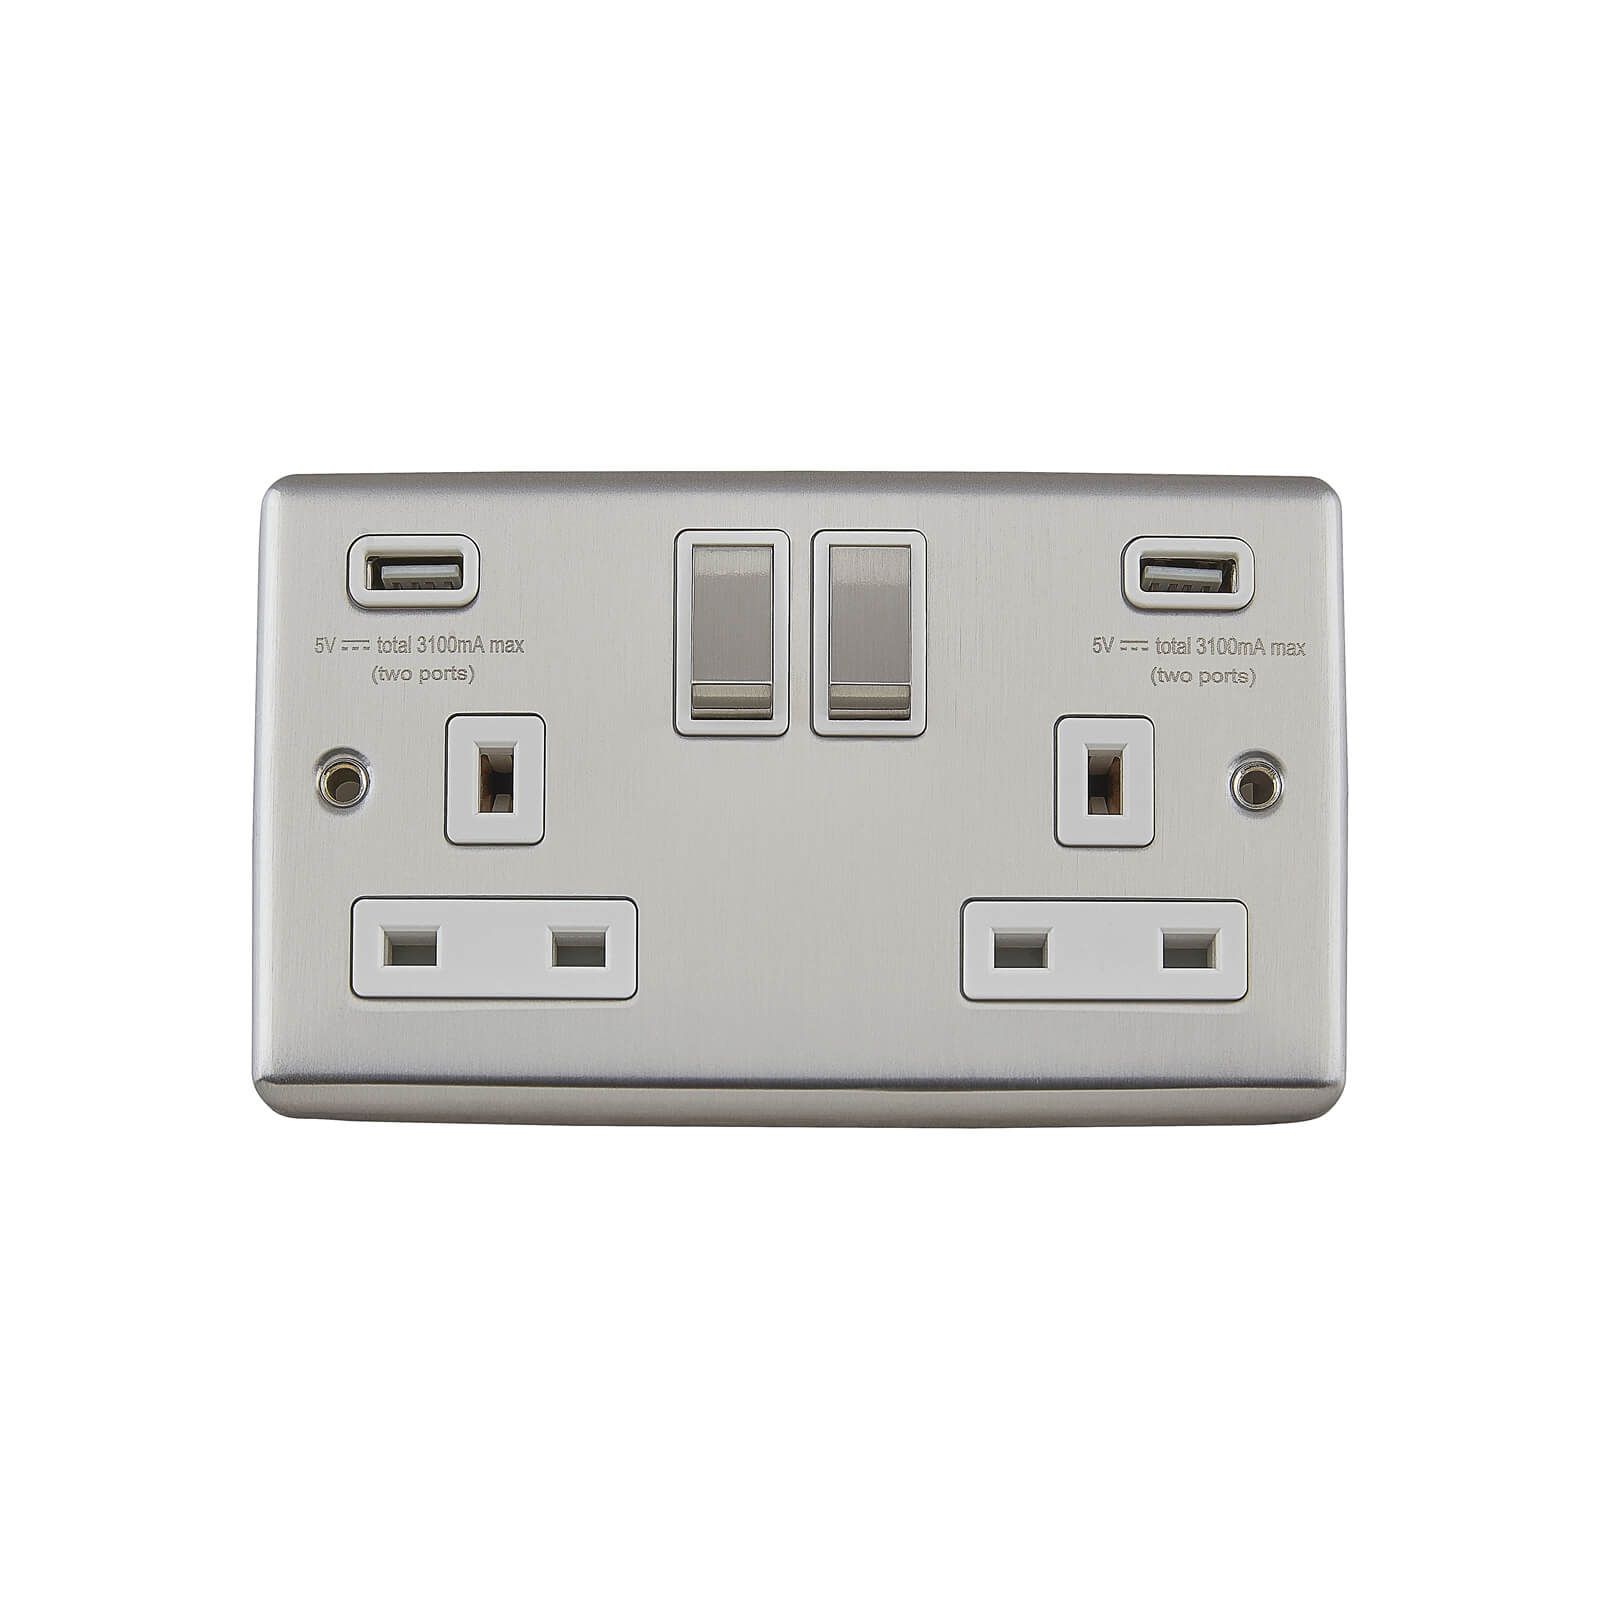 Arlec Metal Screwed 13 Amp 2 Gang Switched Socket with 2 x 3.A USB Stainless Steel